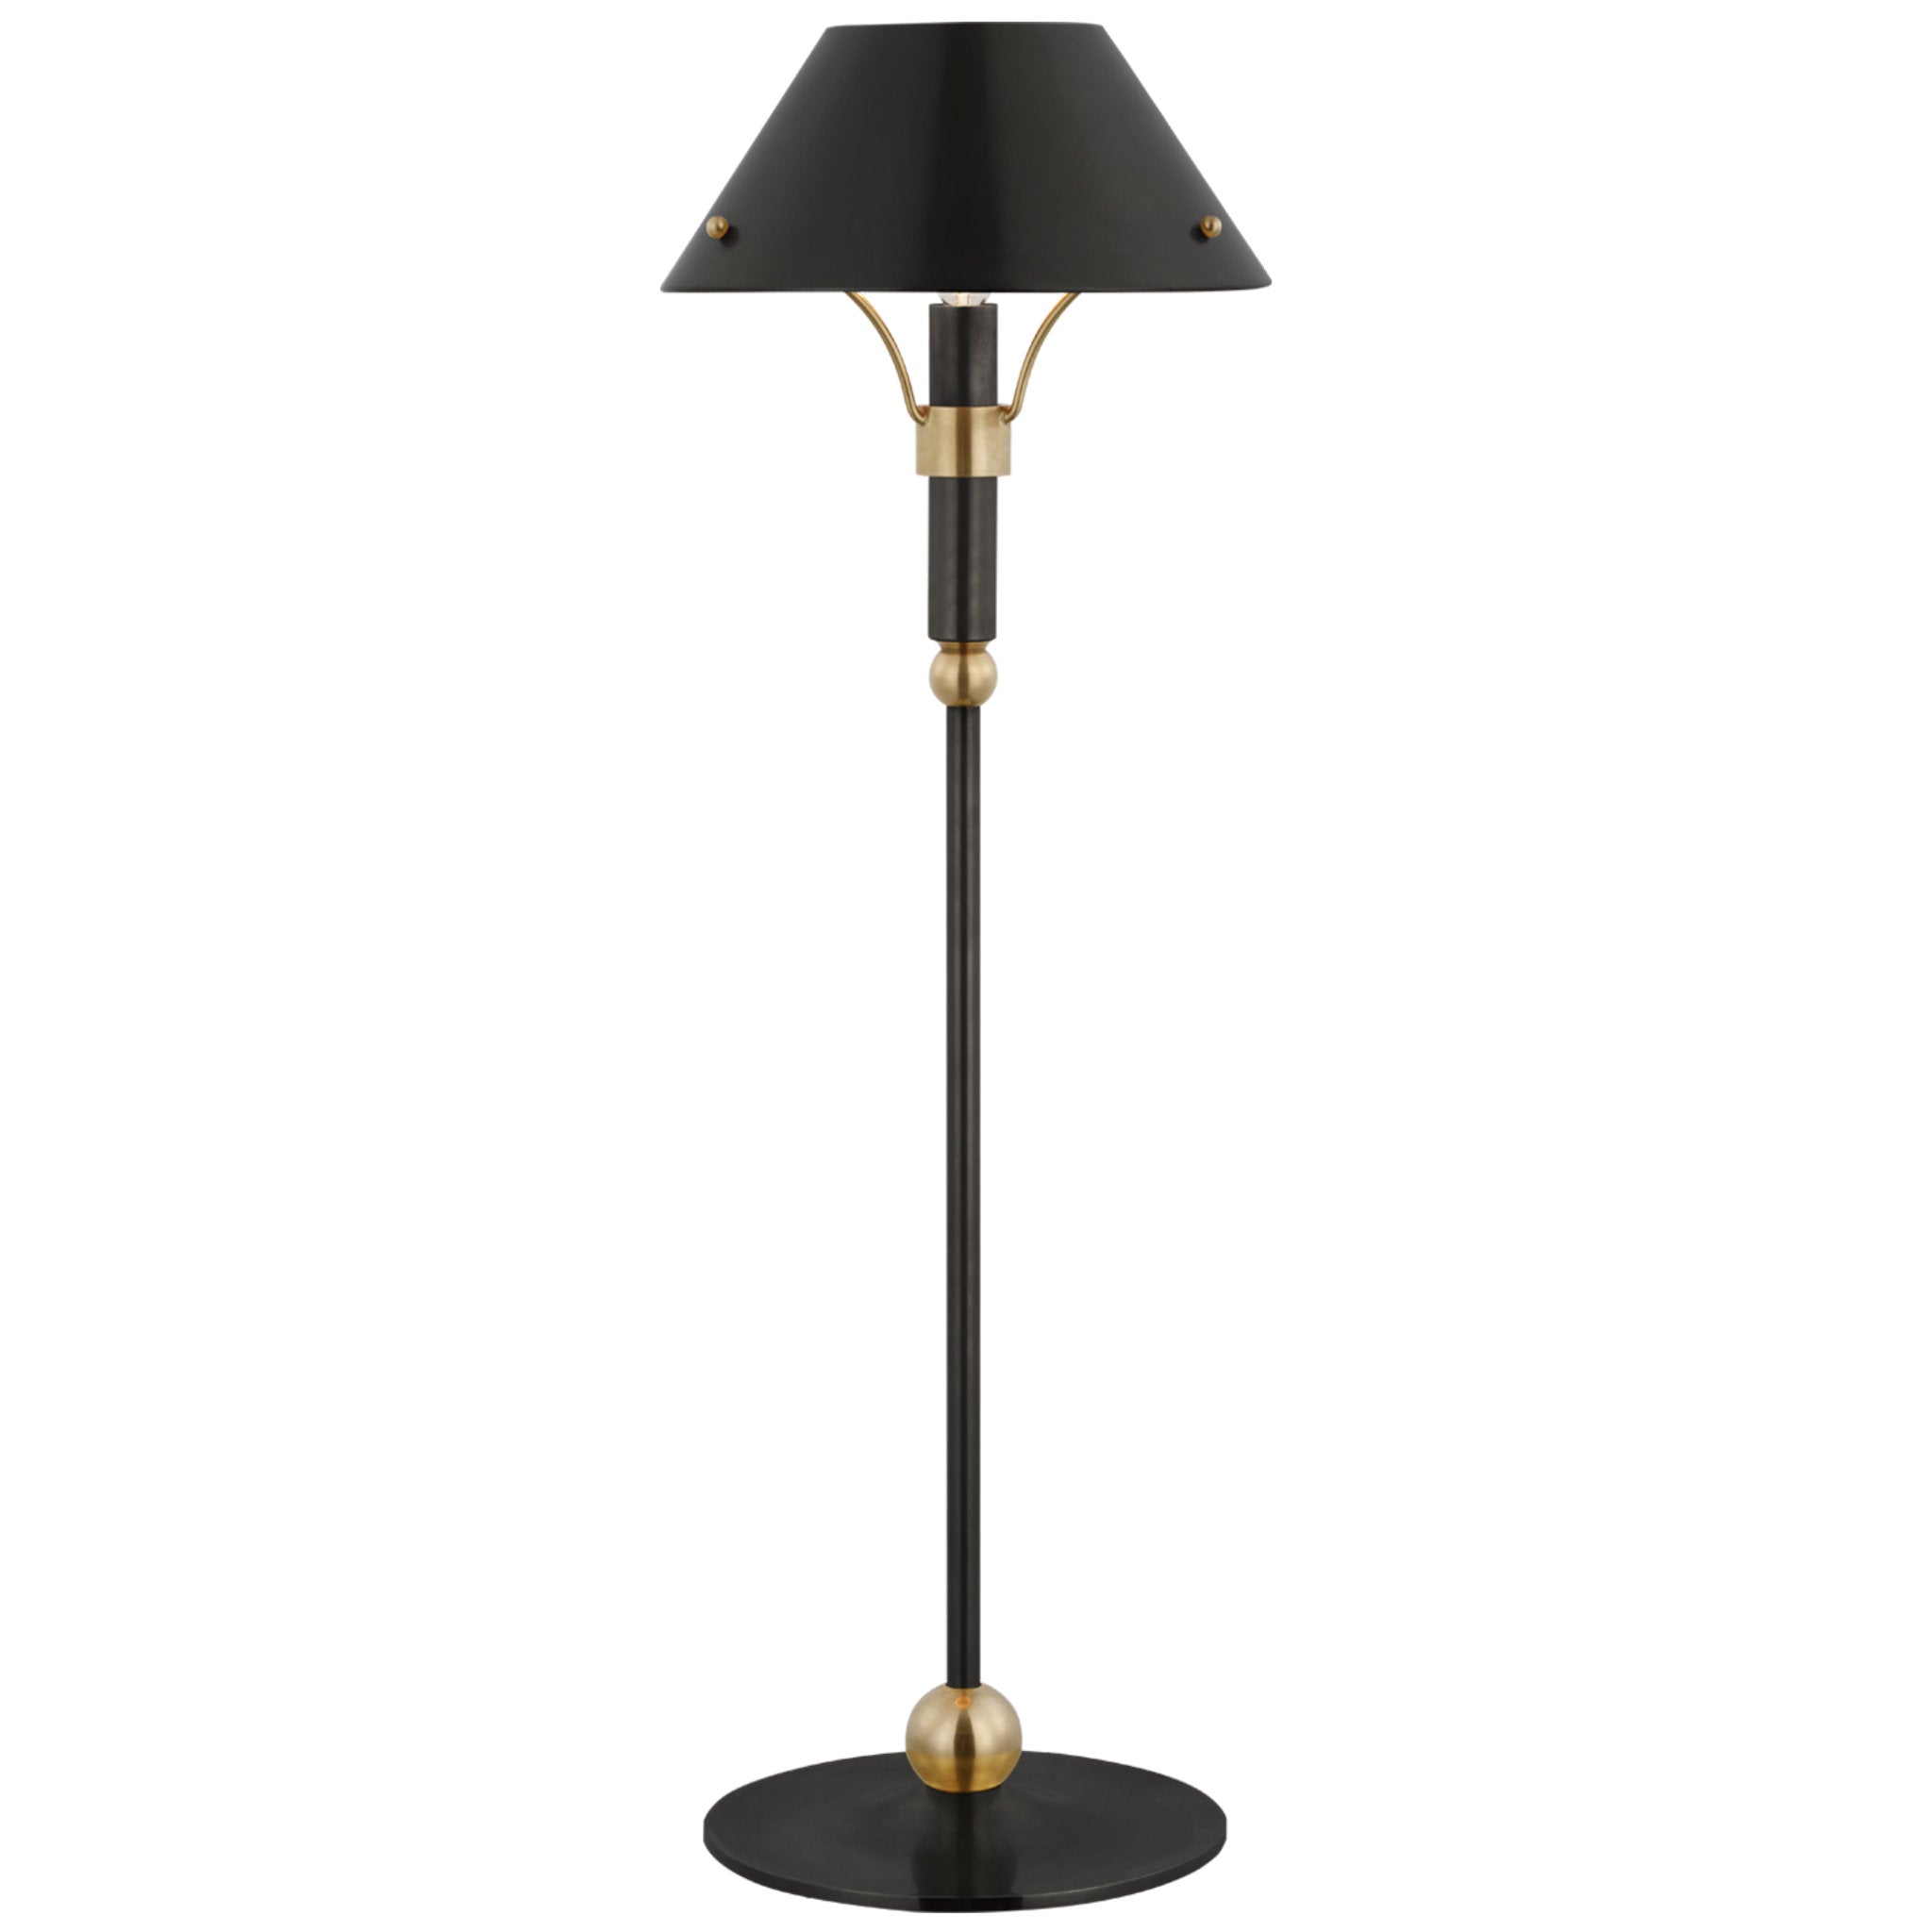 Thomas O'Brien Turlington Medium Table Lamp in Bronze and Hand-Rubbed Antique Brass with Bronze Shade